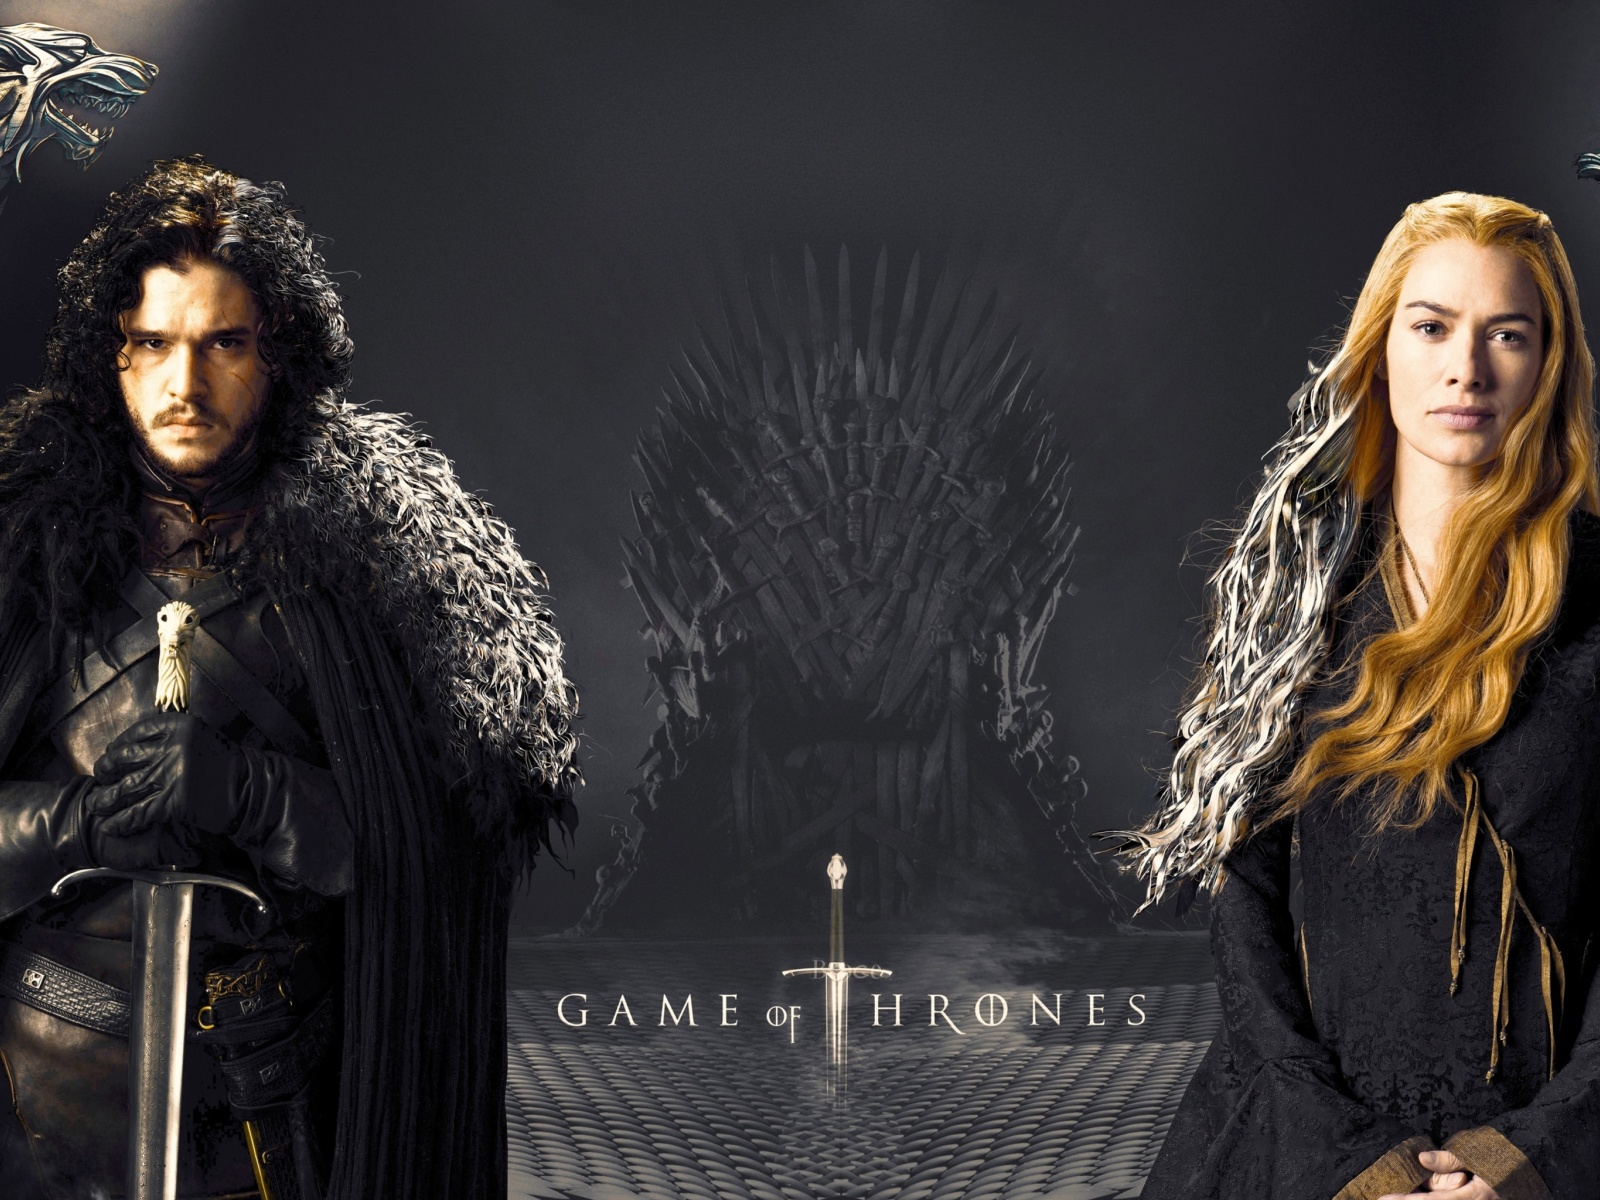 Game Of Thrones actors Jon Snow and Cersei Lannister wallpaper 1600x1200